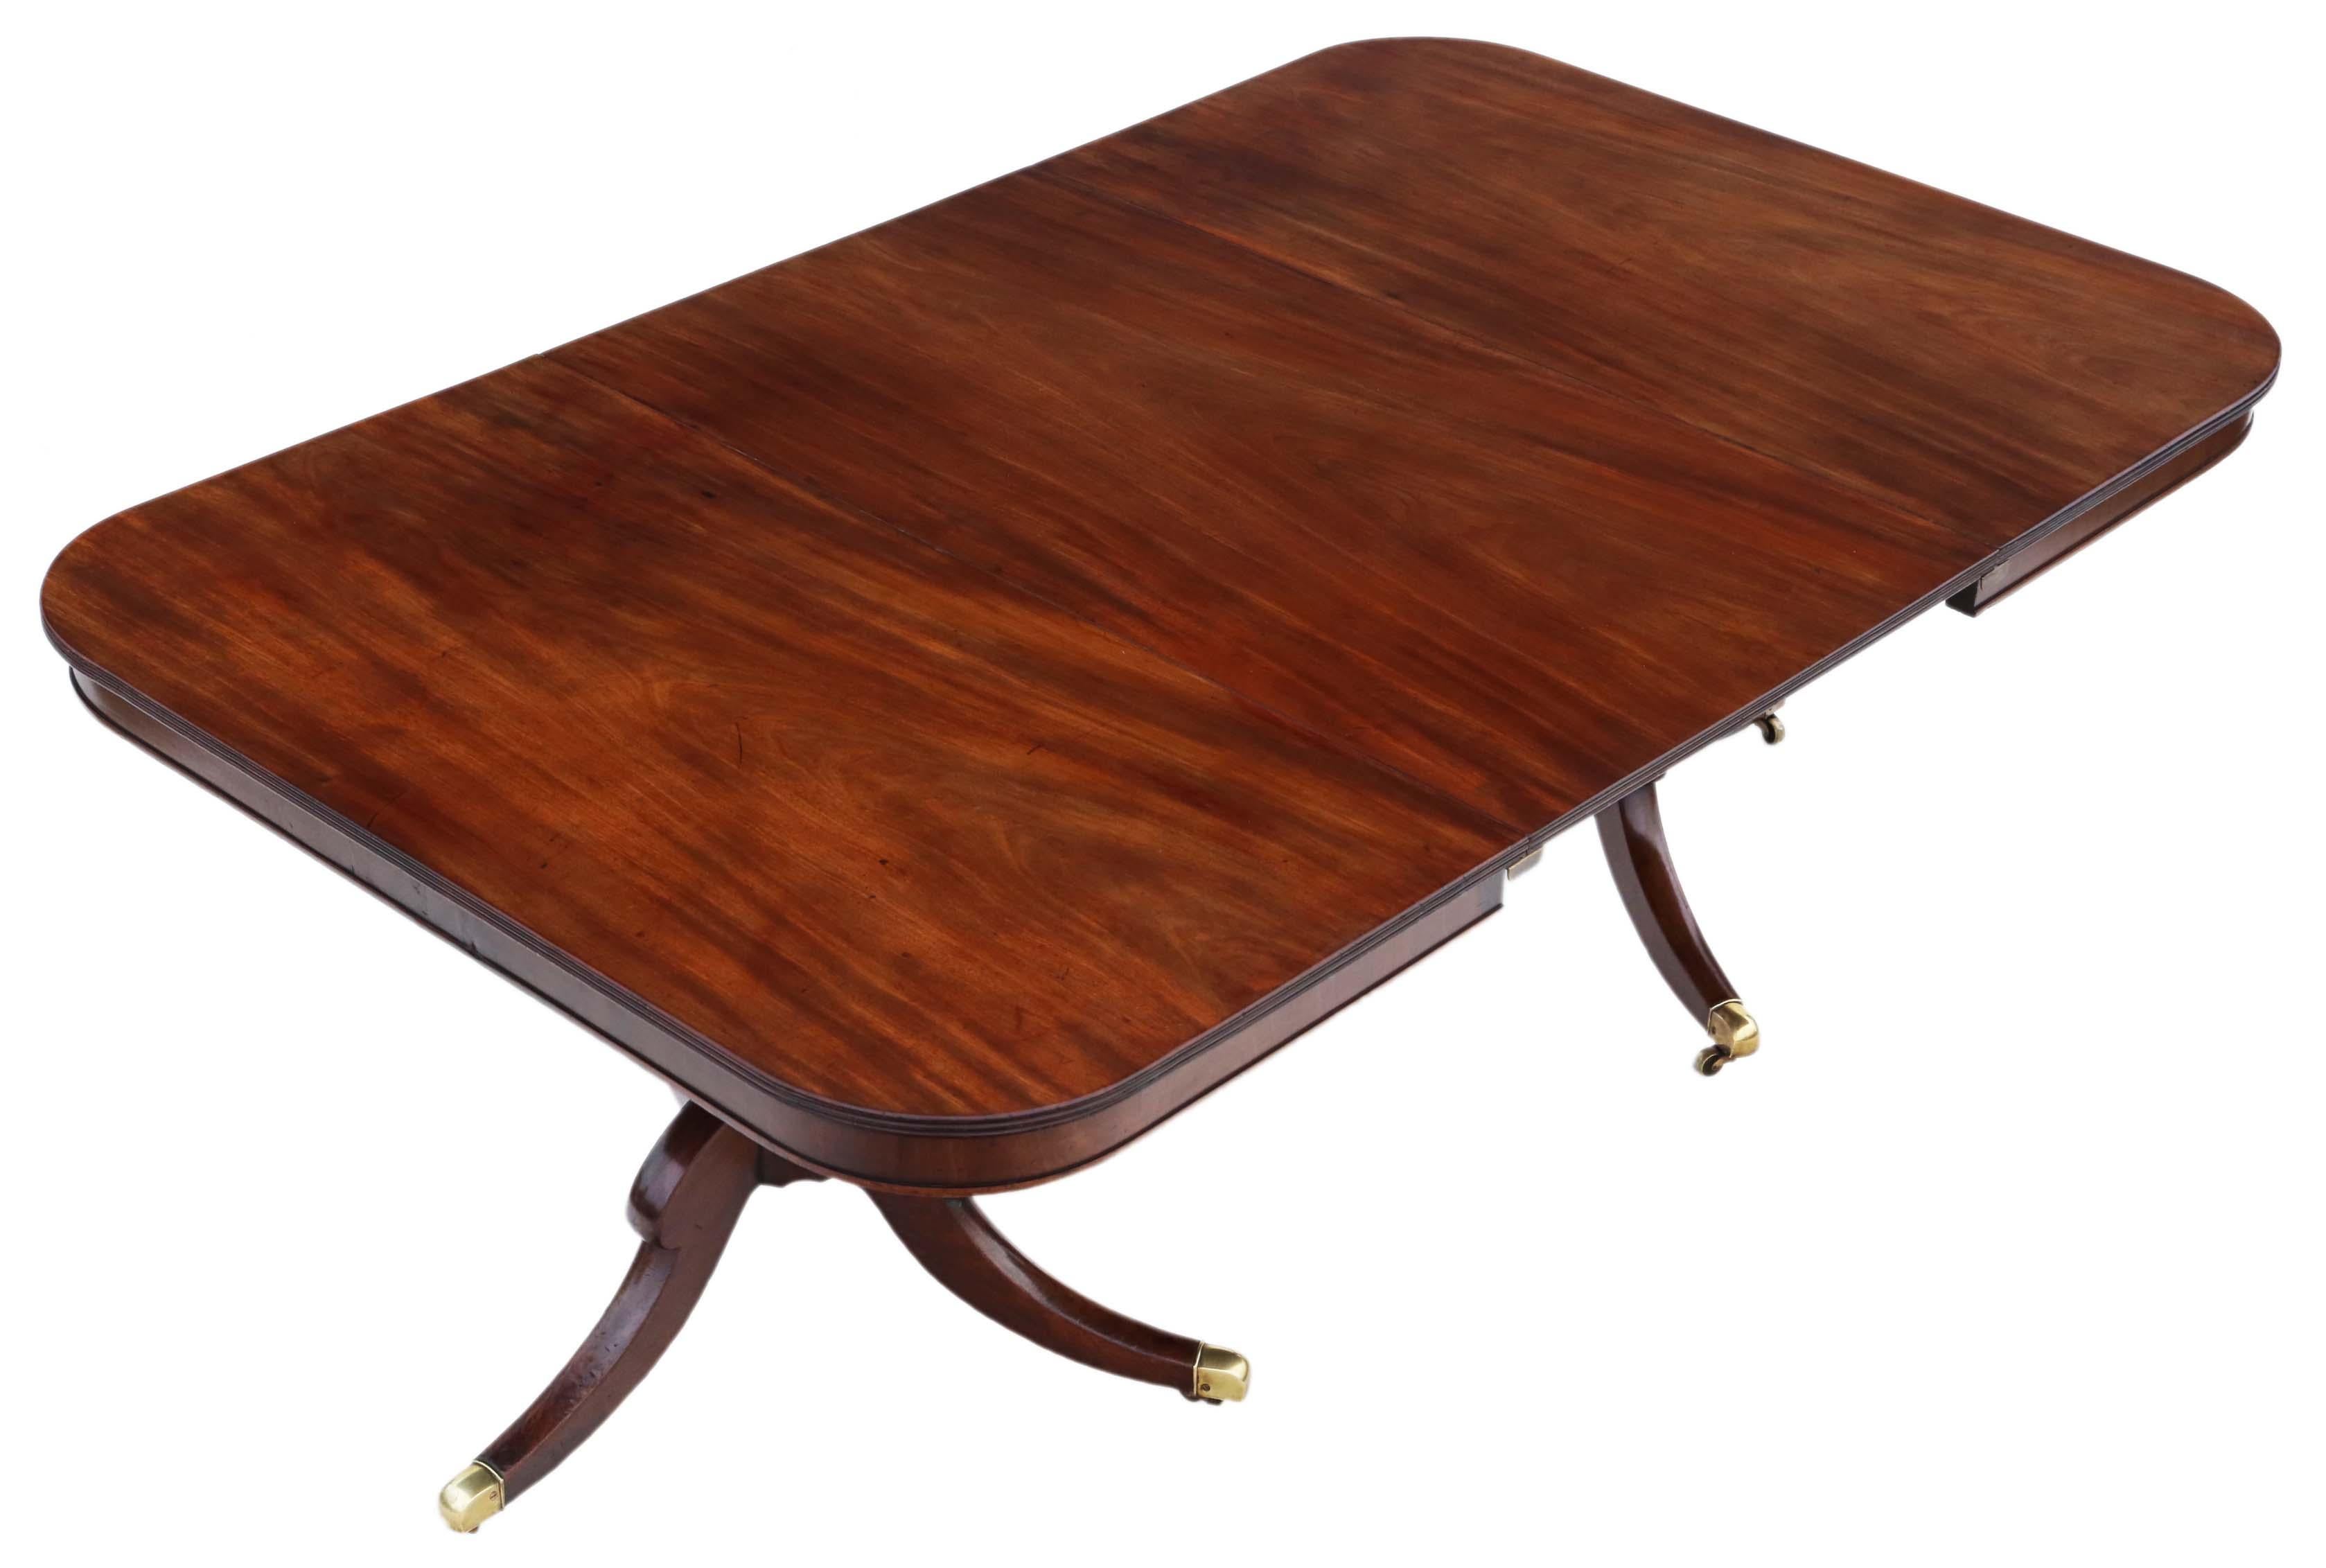 Antique large fine quality mahogany extending twin pedestal extending dining table early 19th Century.

The table has a lovely colour and stands on quality brass castors. The finishes are in good order, with minor historic knocks, marks and